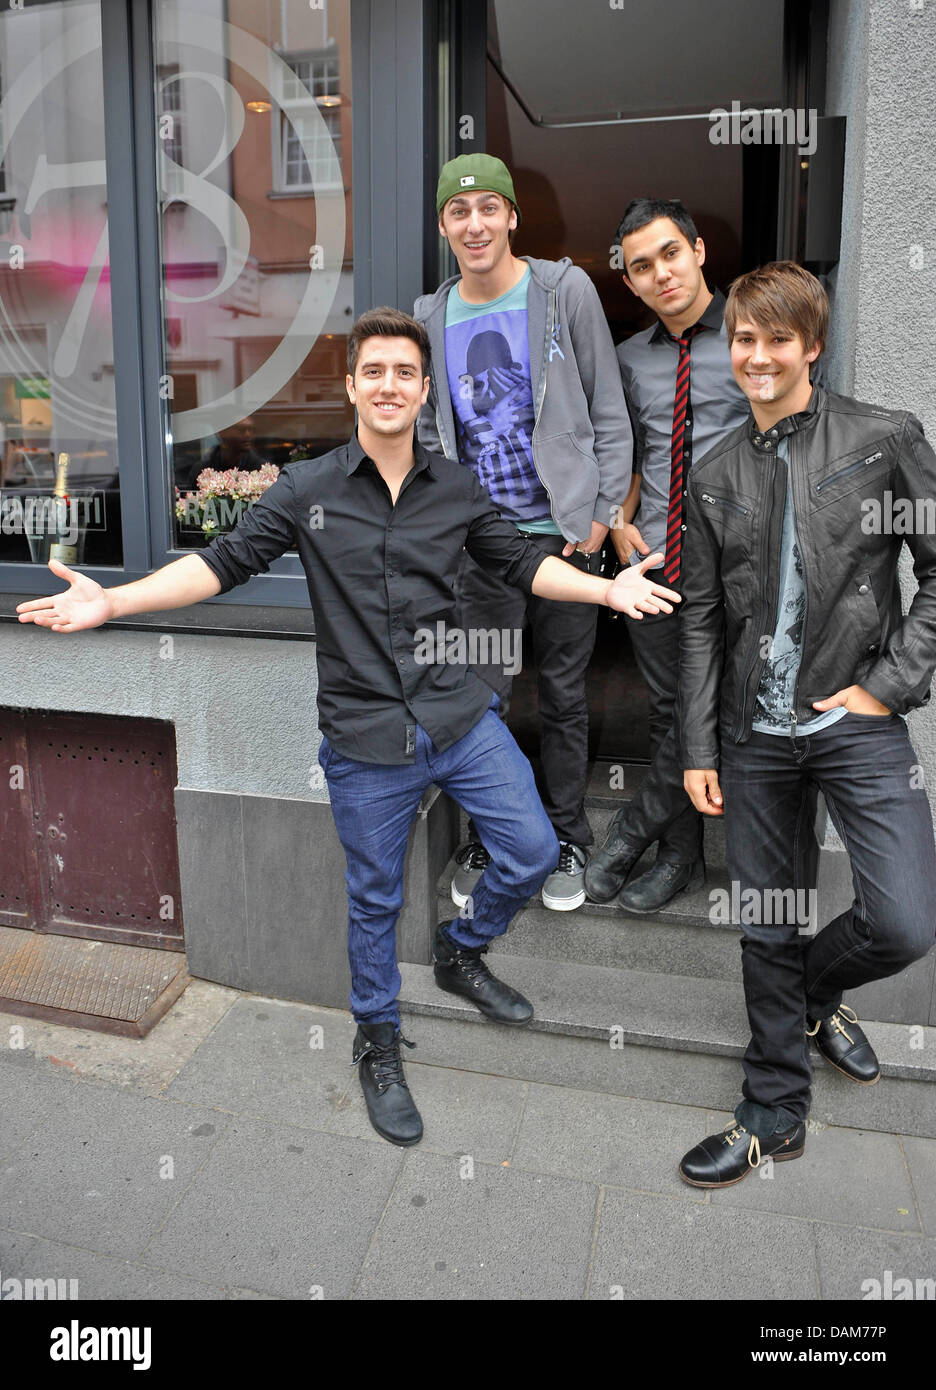 Logan Henderson, Kendall Schmidt, Carlos Pena Jr. and James Maslow (l-r) of the band Big Time Rush pose in Cologne, Germany, 26 May 2011. Big Time Rush will perform during the ceremony for the Comet music prize in Oberhausen, Germany on 27 May 2011. Photo: HENNING KAISER Stock Photo